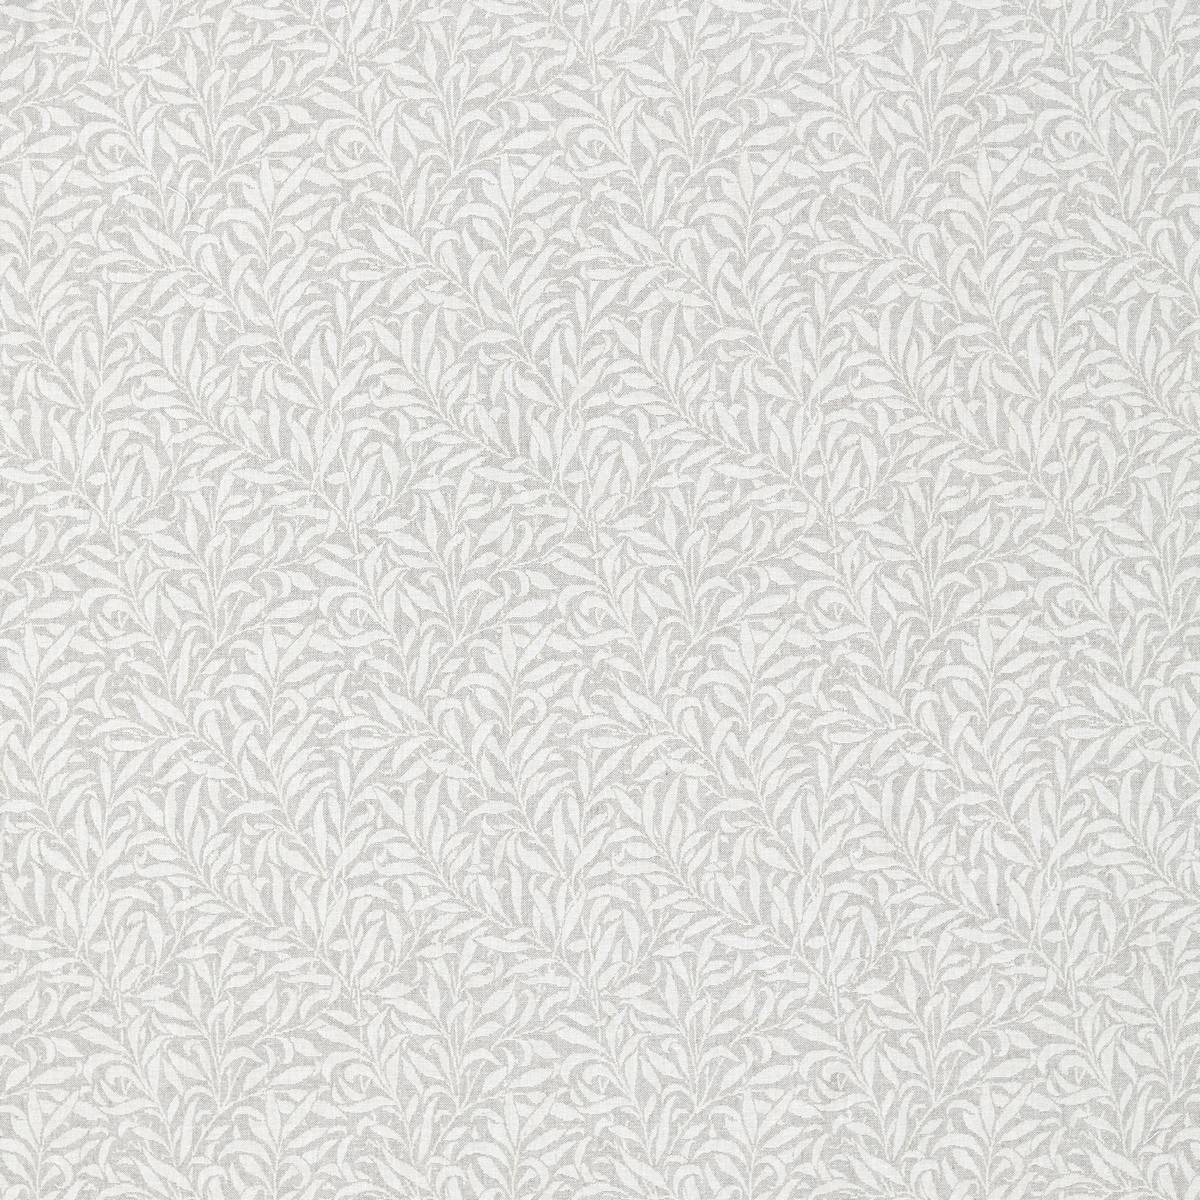 Pure Willow Boughs Weave Lightish Grey Fabric by William Morris & Co.